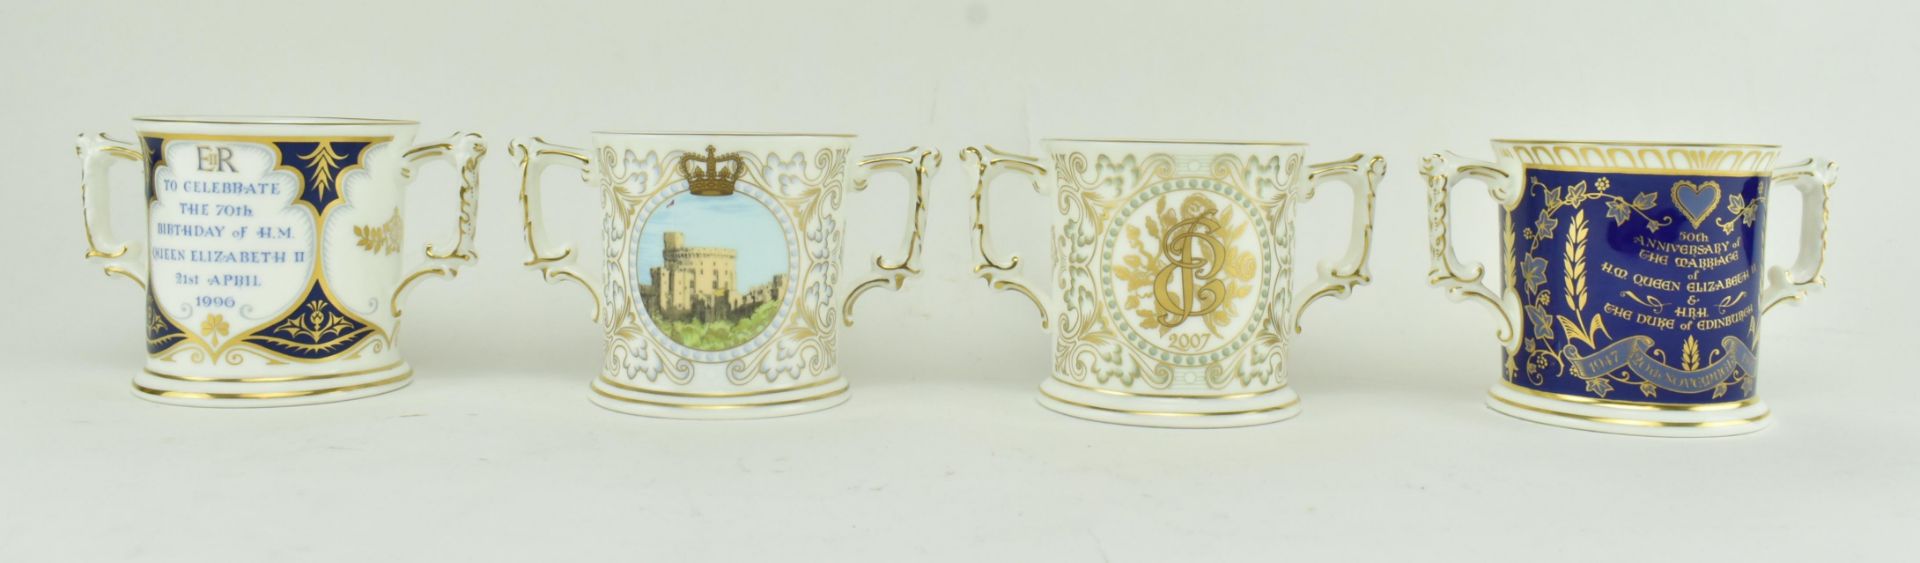 FOUR ROYAL CROWN DERBY BONE CHINA TWIN-HANDLED LOVING CUPS - Image 2 of 8